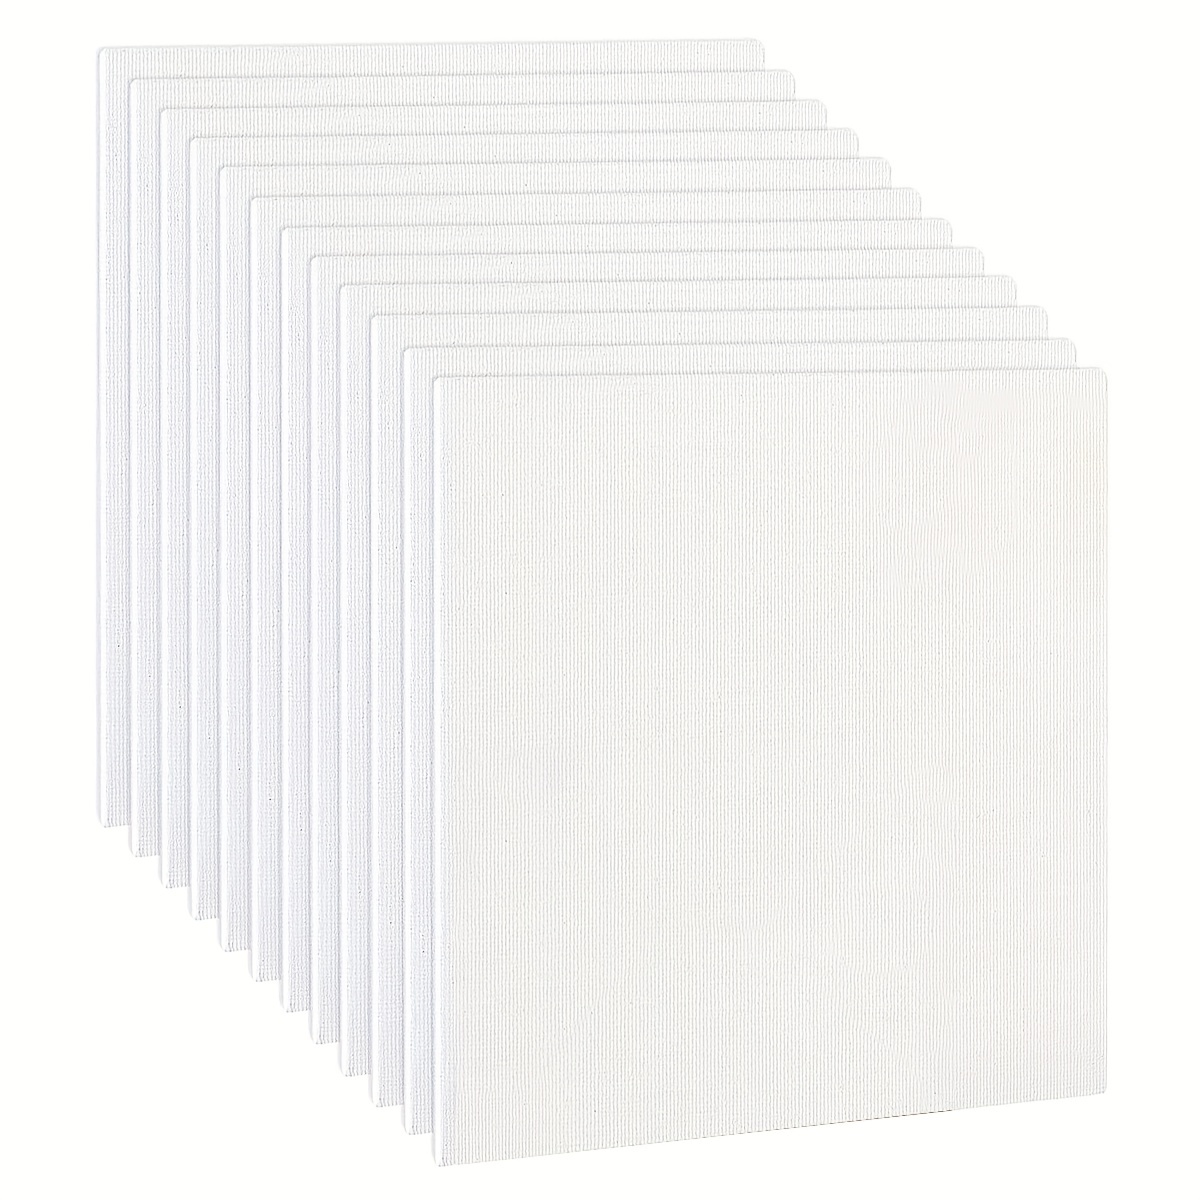 16PCS Blank Painting Canvas White Paper Card Board Watercolor DIY Homemade  Art